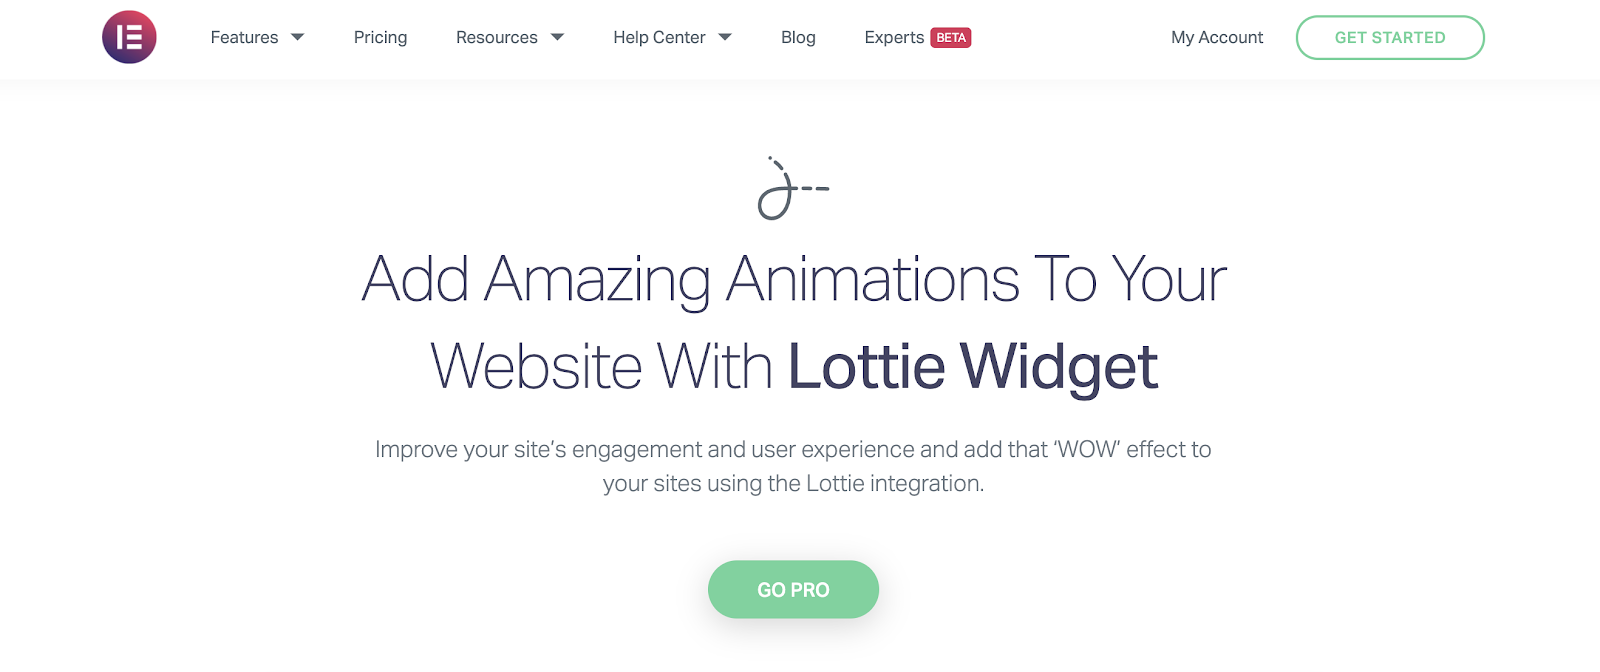 Elementor product page for the Lottie Widget